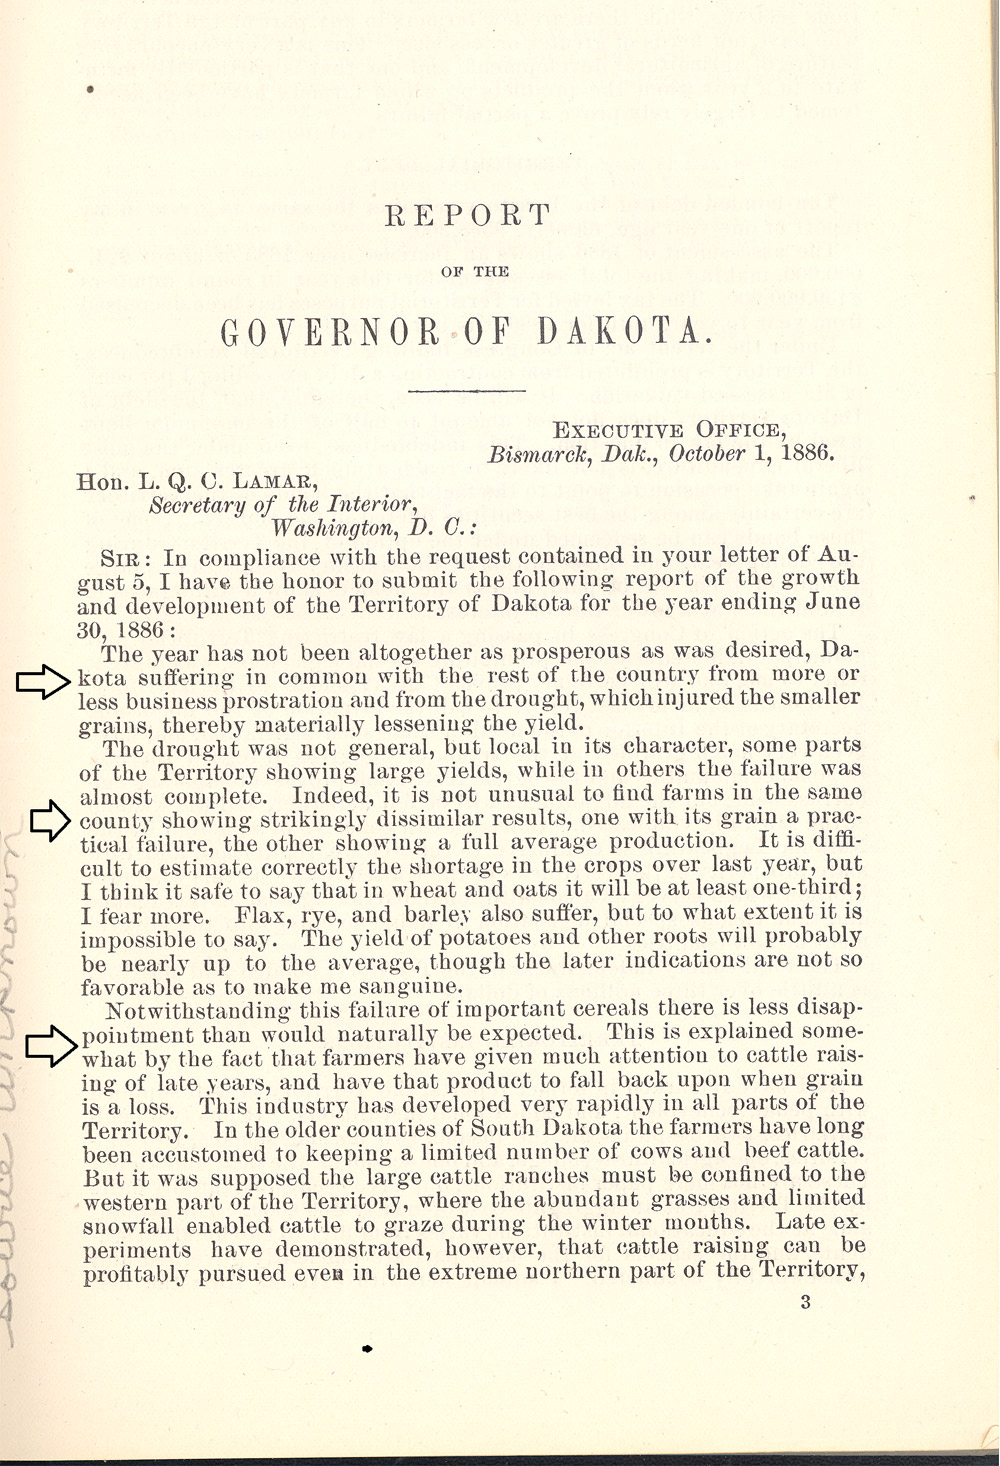 The governor of Dakota Territory reported to the Secretary of the Interior each year because territorial government was under the regulation of the Department of the Interior.  In 1886, Governor Gilbert Pierce reported that a severe drought had affected crops in 1886.  He suggested that the drought had encouraged cattle raising in the northern part of Dakota Territory.   Governor Pierce’s annual report included a chart showing how many people in 1886 had filed on public land under the Homestead, Timber Culture, or Pre-emption laws.  In 1887, Governor Louis K. Church presented a similar chart in his annual report to the Secretary of the Interior.  His data demonstrates that the drought had caused a dramatic reduction in the number of new filings on federal land.   Church shows an increase in the number of “proofs” on Homestead and Timber Culture claims.  This is because many of the claimants who arrived during the boom had qualified to receive the deed to their land following five years of required residence.  Church’s data also shows an increase in the number of Homestead claims that were “commuted,” or paid for in cash.  When they paid for their claims, settlers could sell the land or mortgage it for cash.